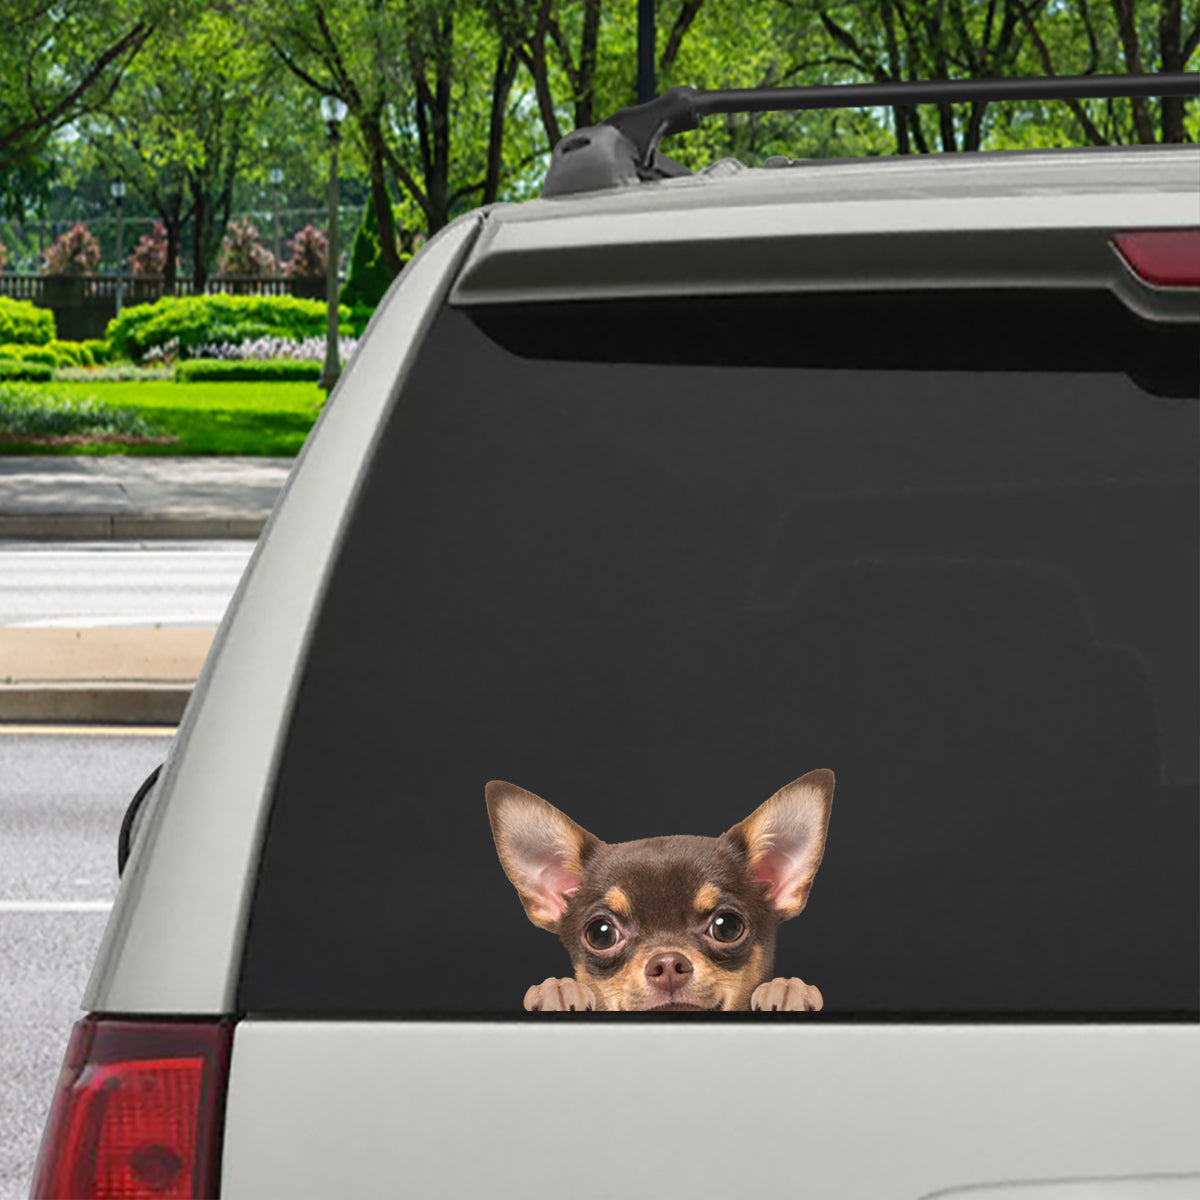 Can You See Me Now - Chihuahua Car/ Door/ Fridge/ Laptop Sticker V3